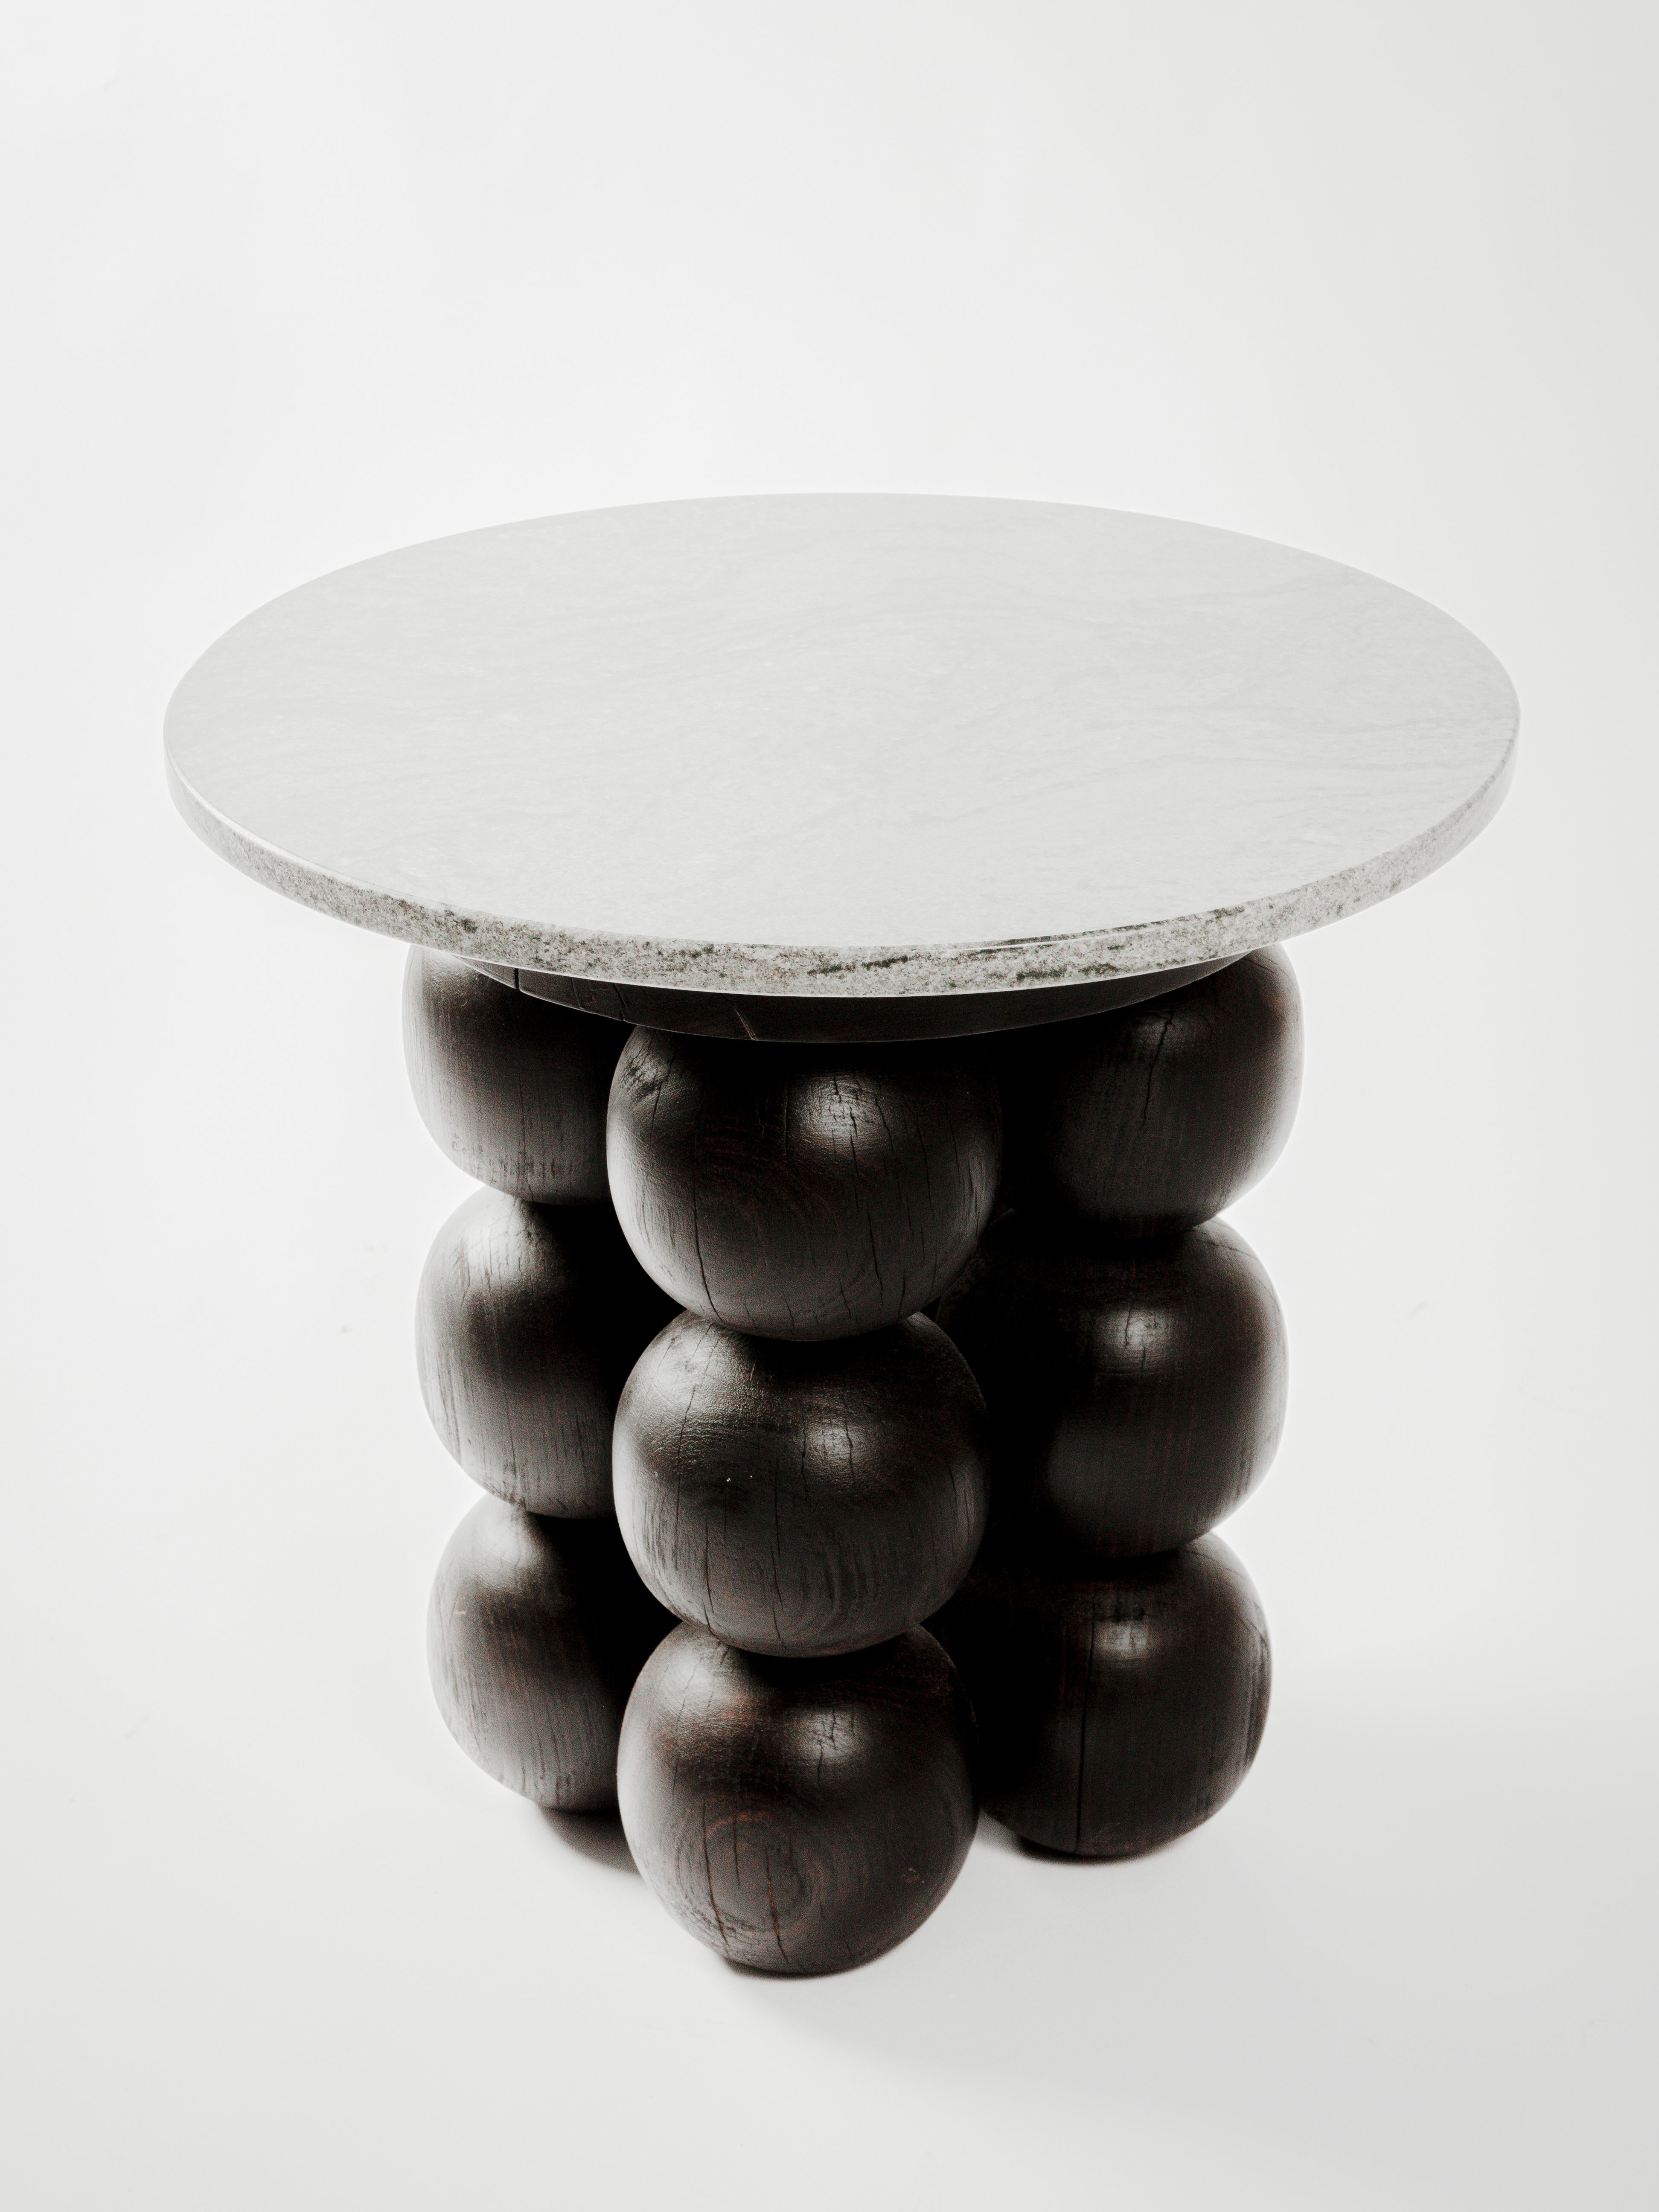 Marble and Black Wood Totem Side Table by Daniel Orozco
Material: Solid wood, Marble
Dimensions: D 60 x H 57 cm

Marble cover table and 3 ball legs with black finish. Handmade by Mexican artisans.

Daniel Orozco Estudio
We are an inclusive interior